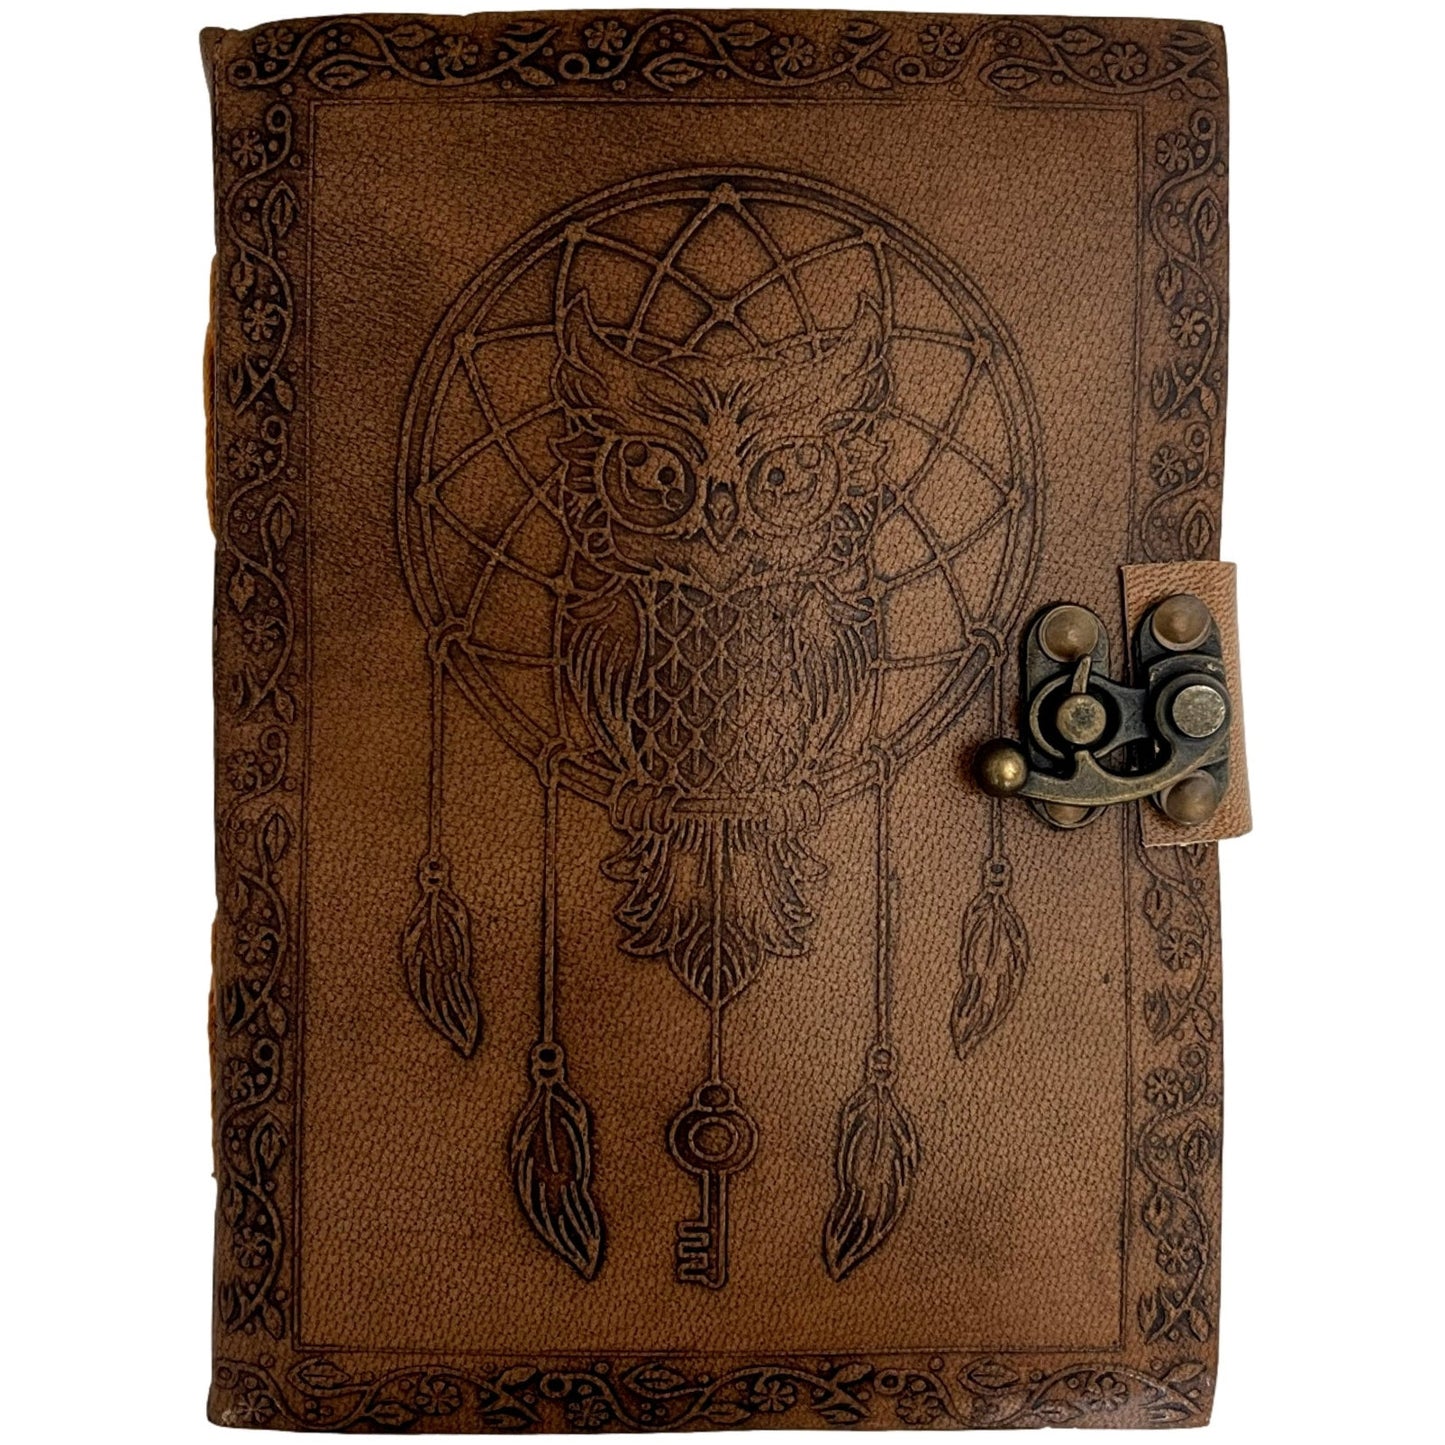 100% Leather Engraved Owl Dream Catcher Journal with Sun Design on back